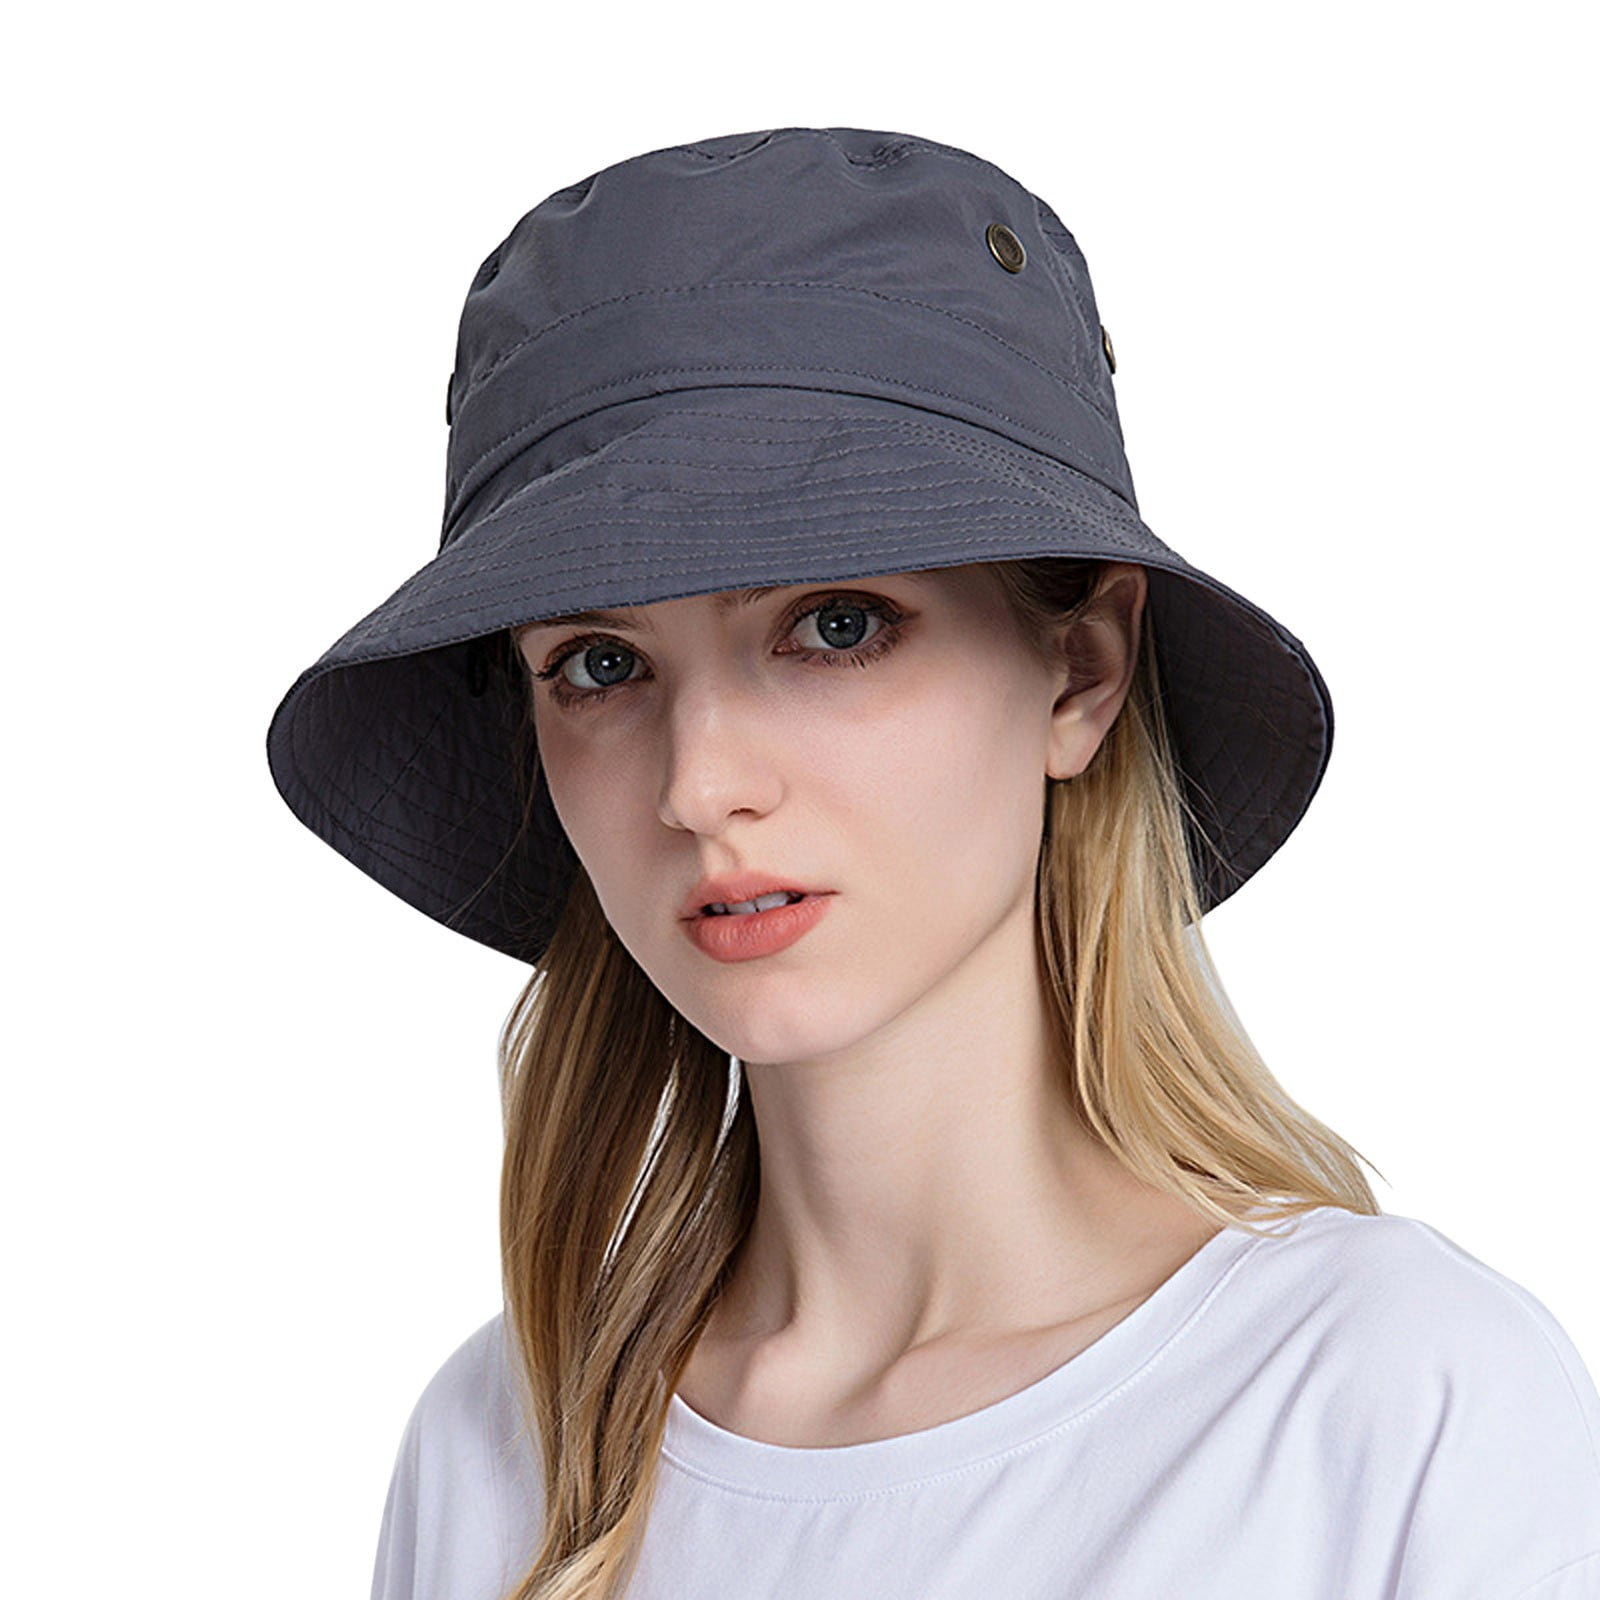 Rain hats for women: Stay Dry in Style缩略图